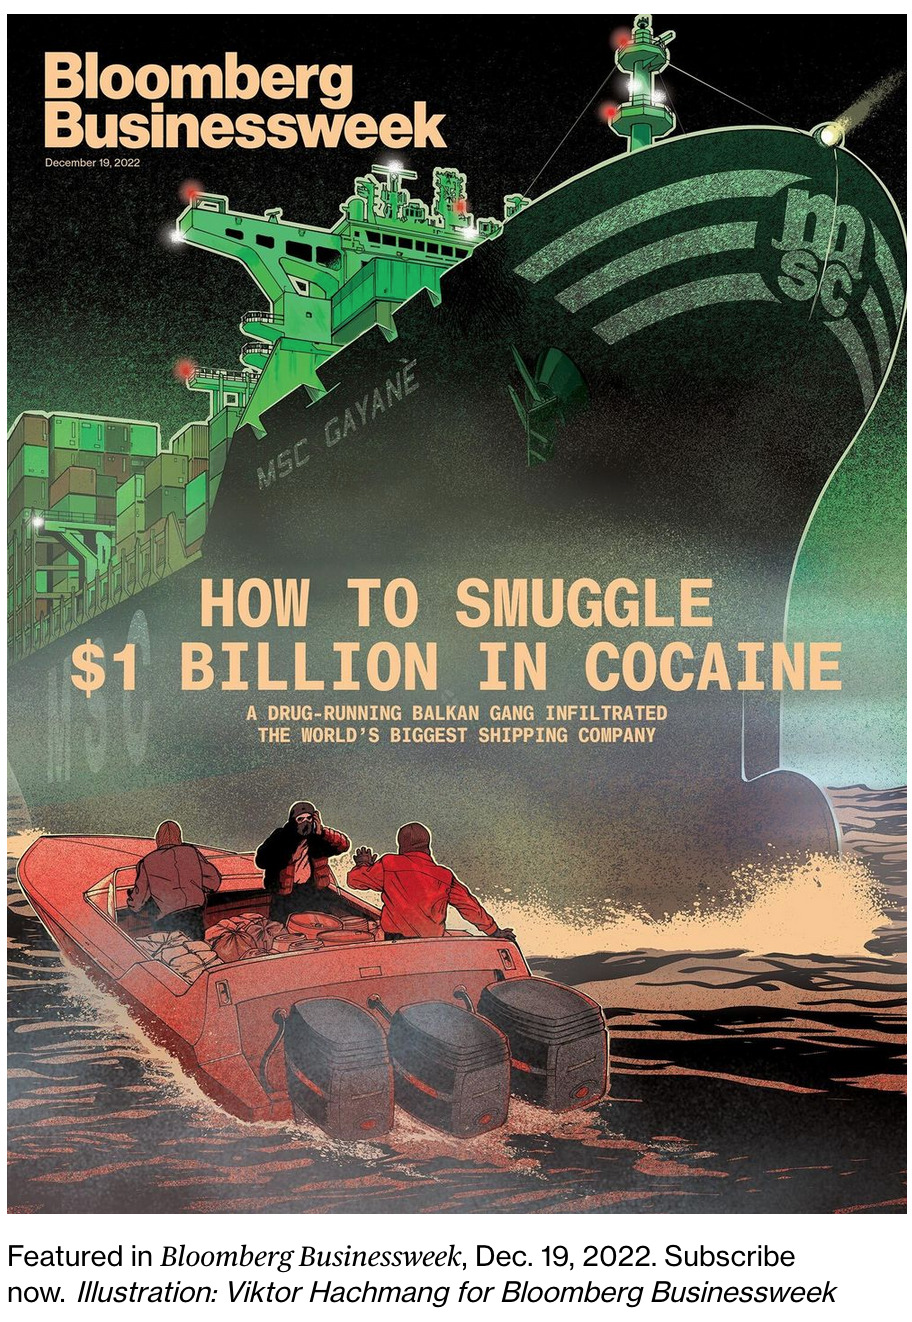 US Customs Seized JP Morgan Chase Ship Carrying $1Billion Of Cocaine  (#GotBitcoin)